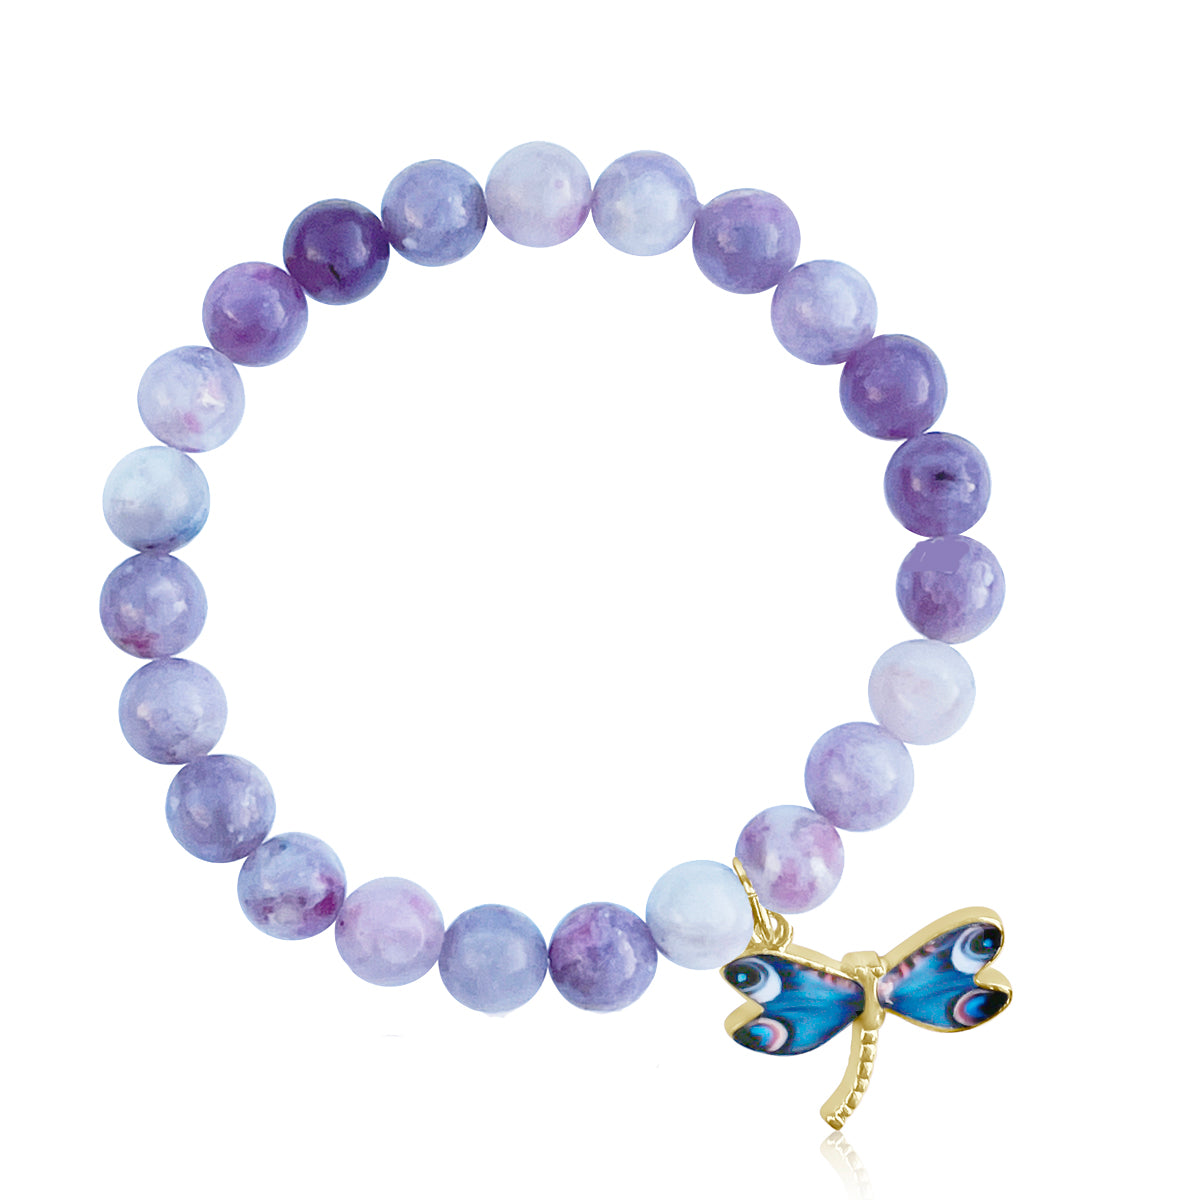 Let the Dragonfly Whispers - Lepidolite Bracelet be your guide, inspiring you to navigate the winds of change with grace, embrace the journey of self-reflection, and reveal your inner light with confidence at every turn.